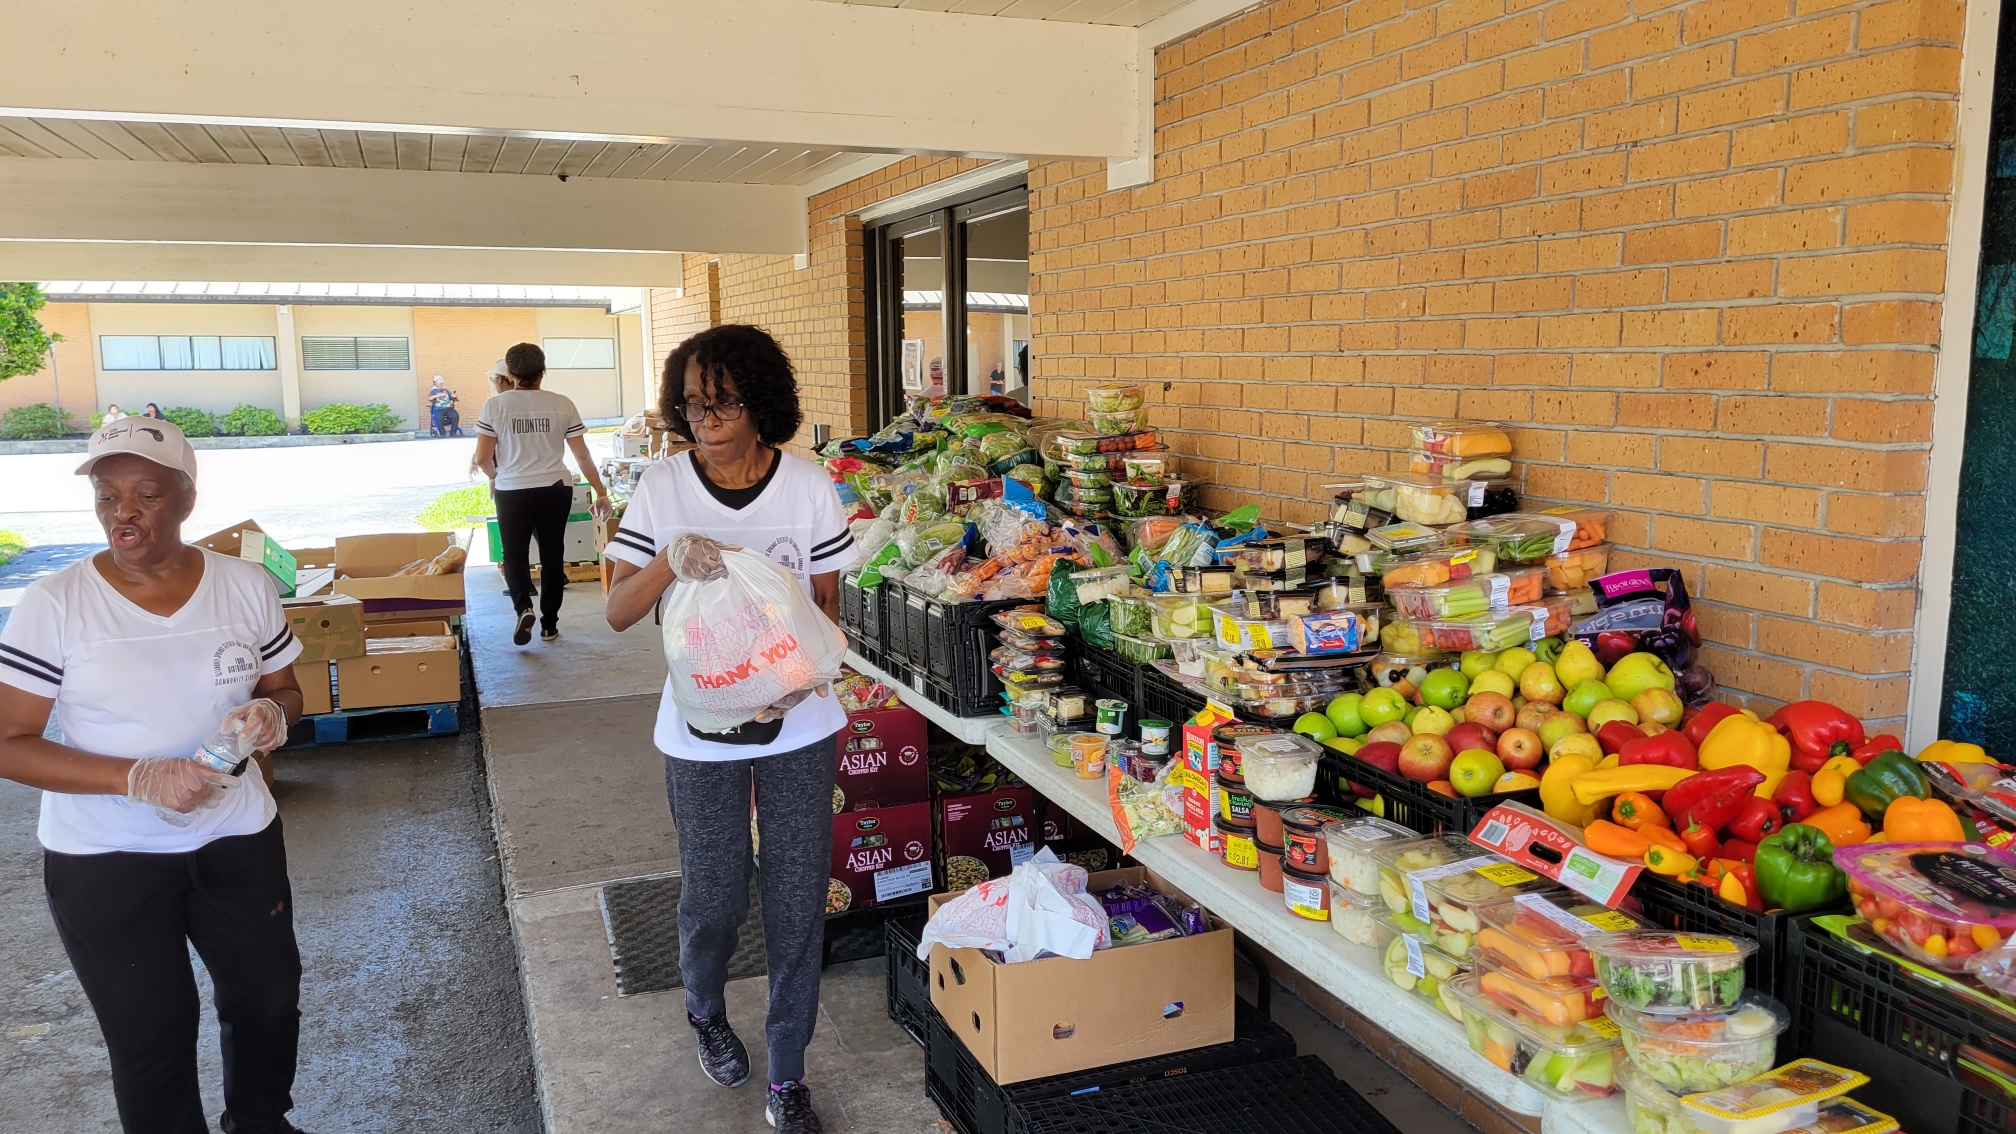 Ladies are standing in front of tables laden with fruits and vegetables at a food drive.